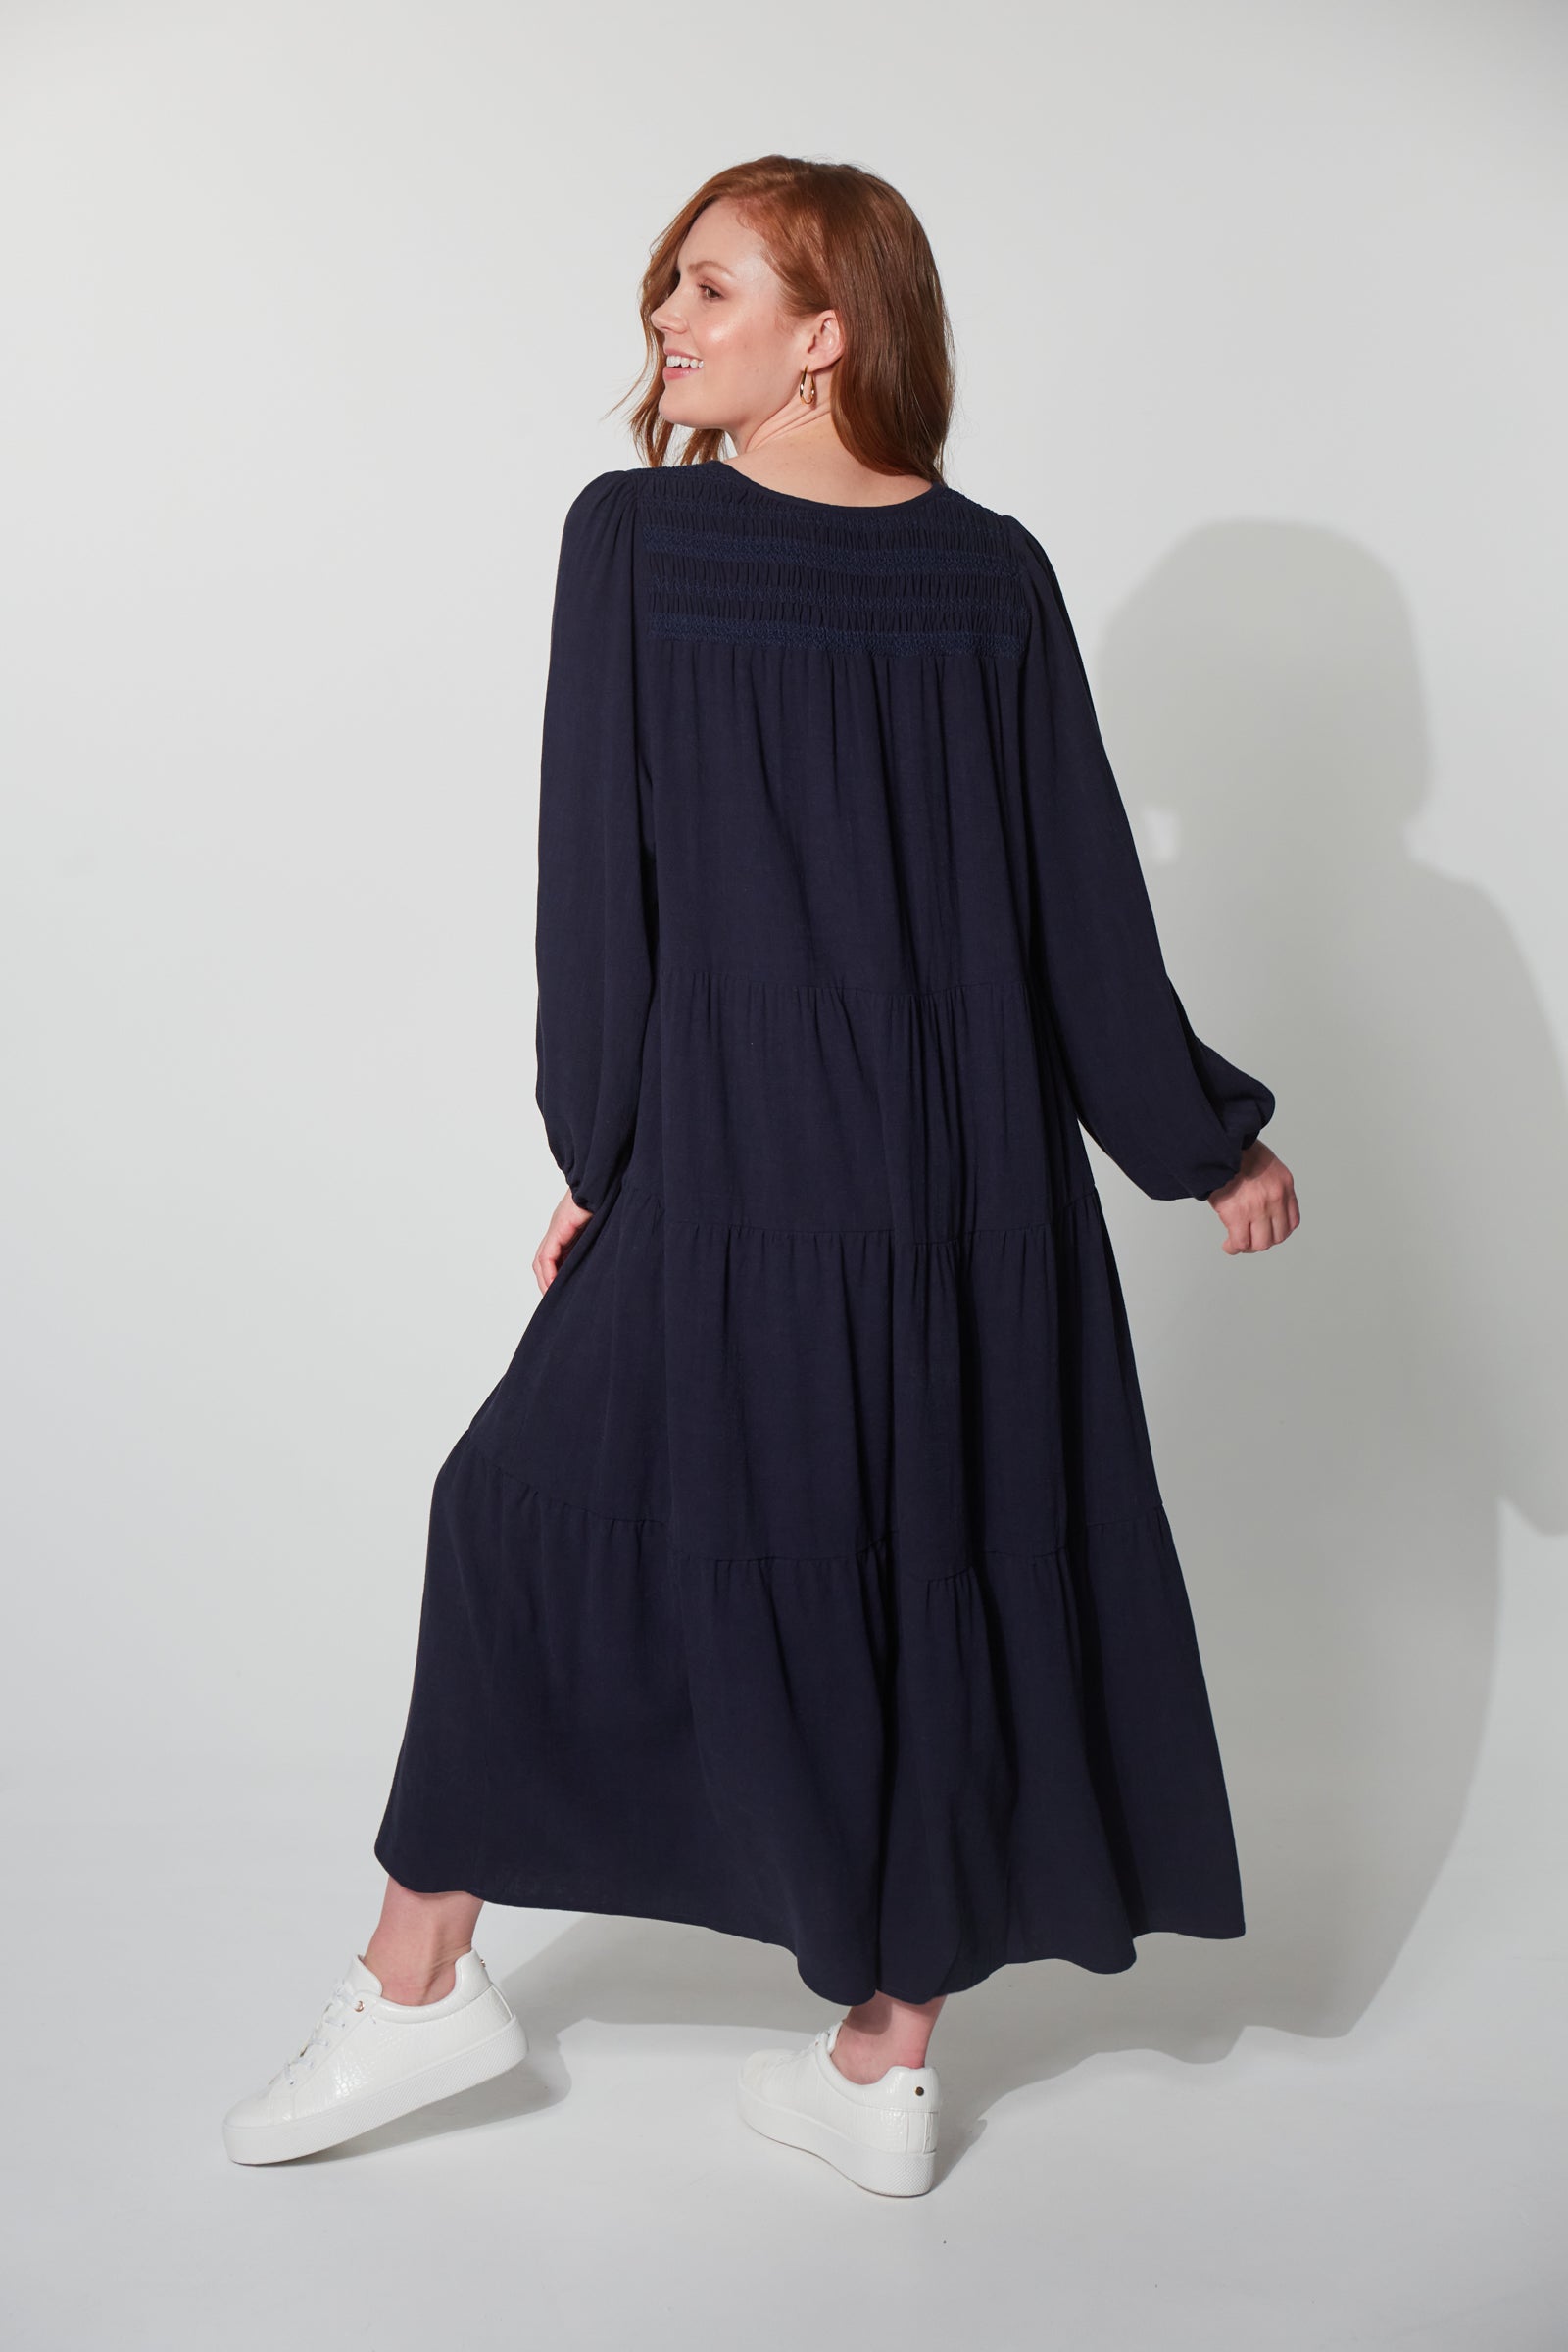 Lauder Tiered Maxi - Midnight-Dresses-Haven-The Bay Room